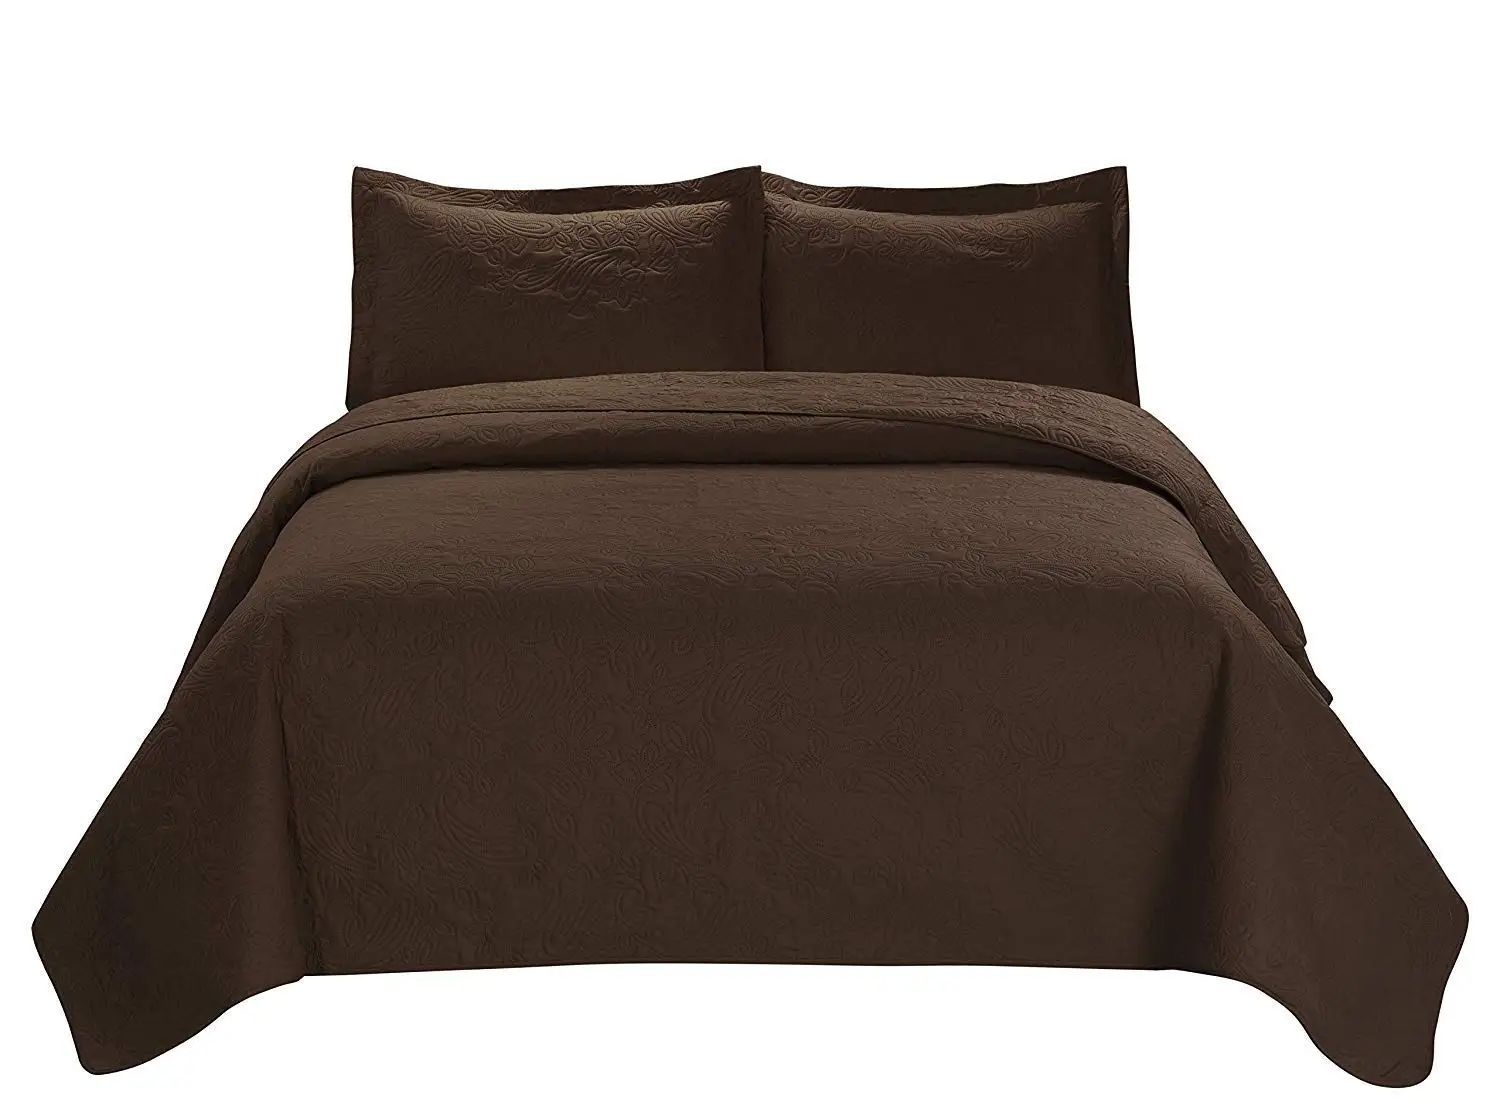 Cheap Chocolate Bedspread Find Chocolate Bedspread Deals On Line